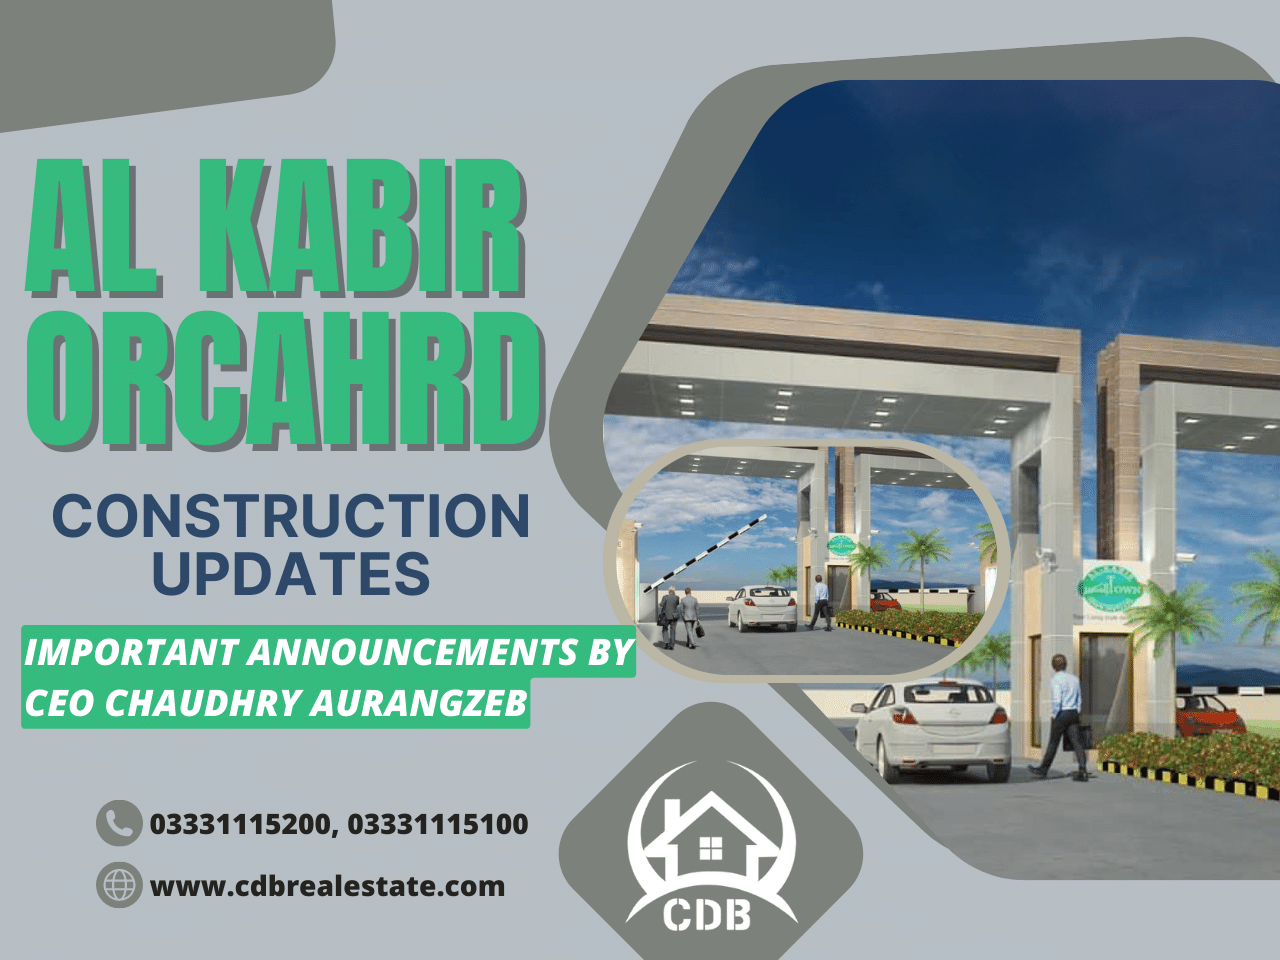 Al Kabir Orchard: Construction Updates & Important Announcements By The CEO